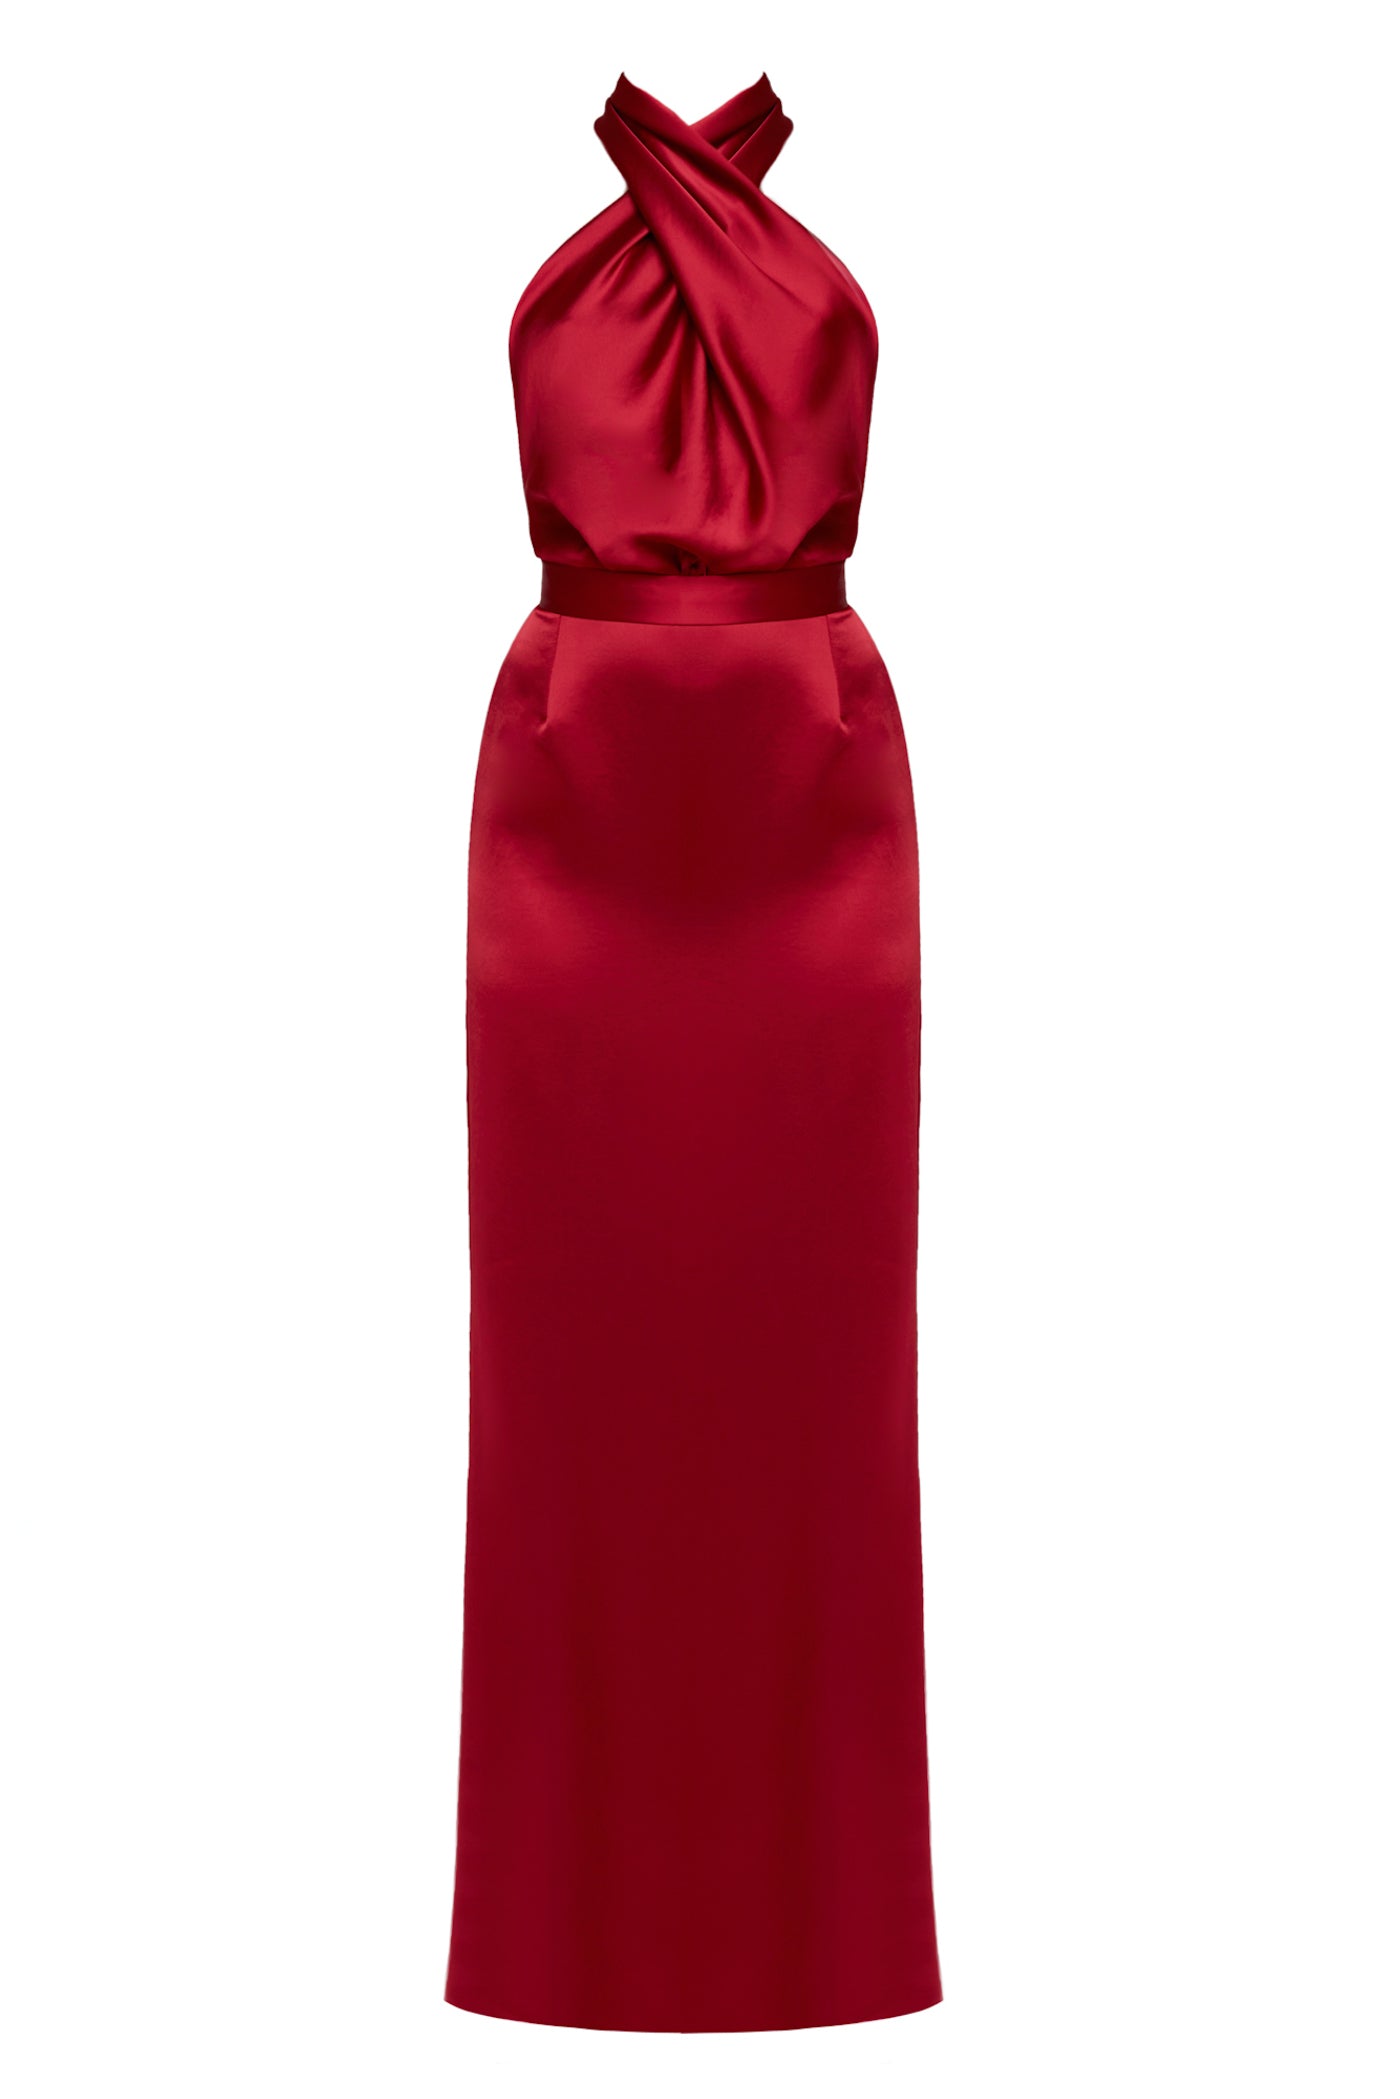 Women's Red Evening Gown